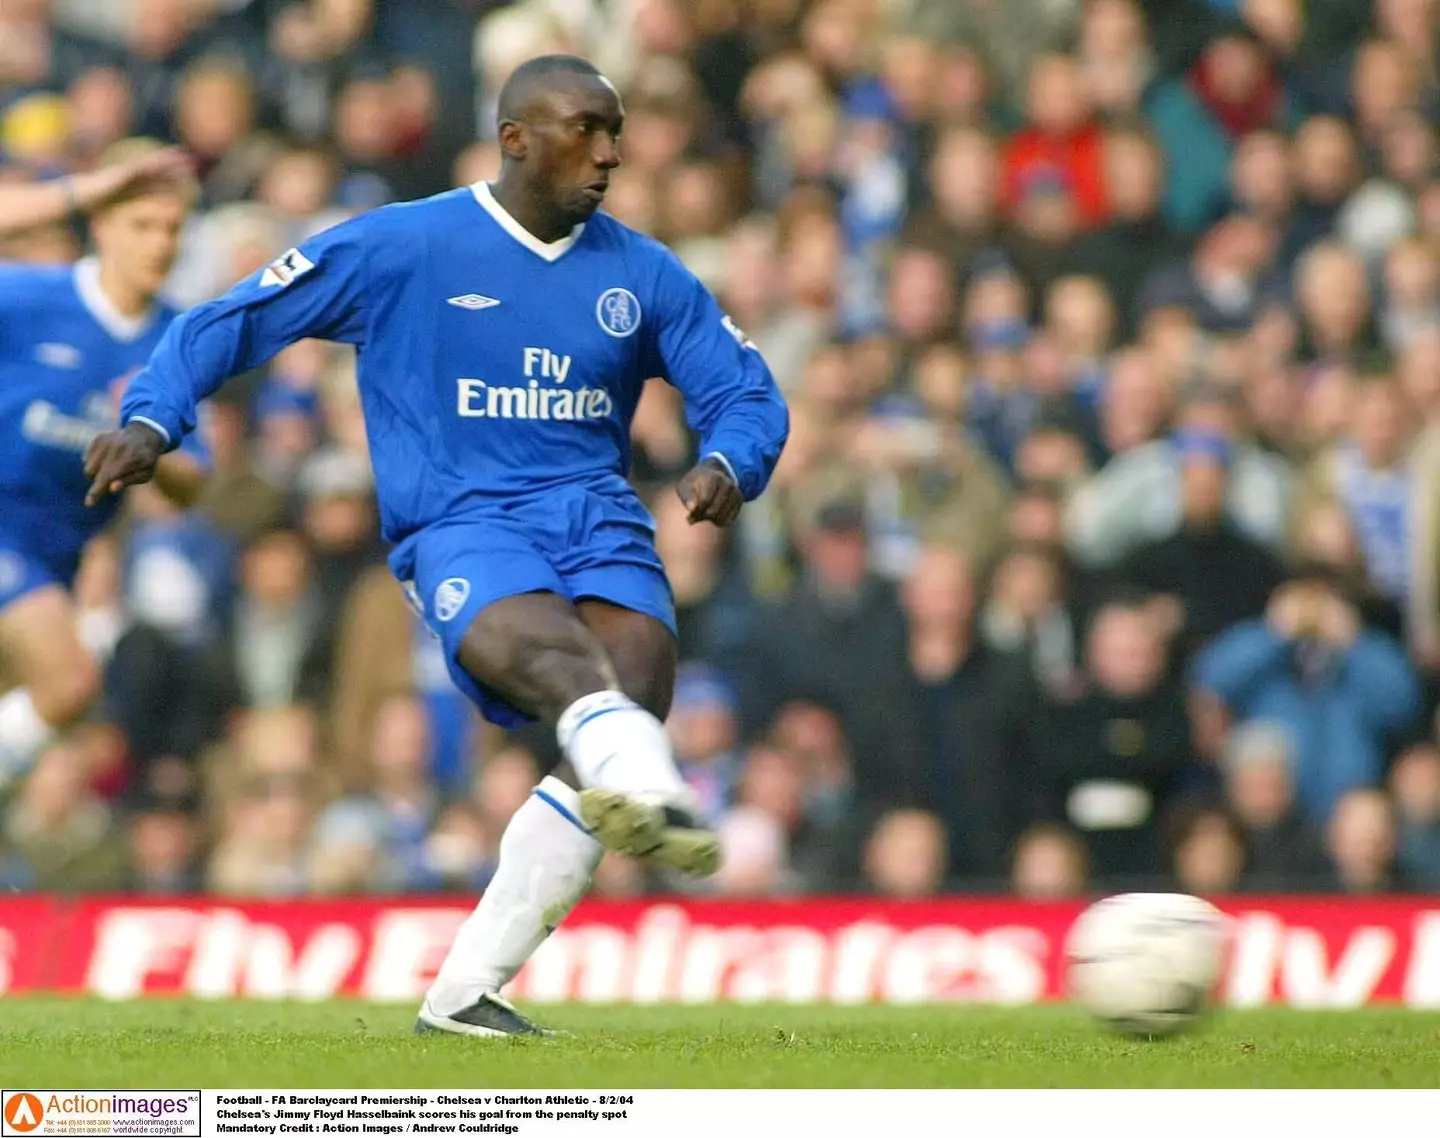 Hasselbaink was a key player for Chelsea before being sold. Image: Alamy